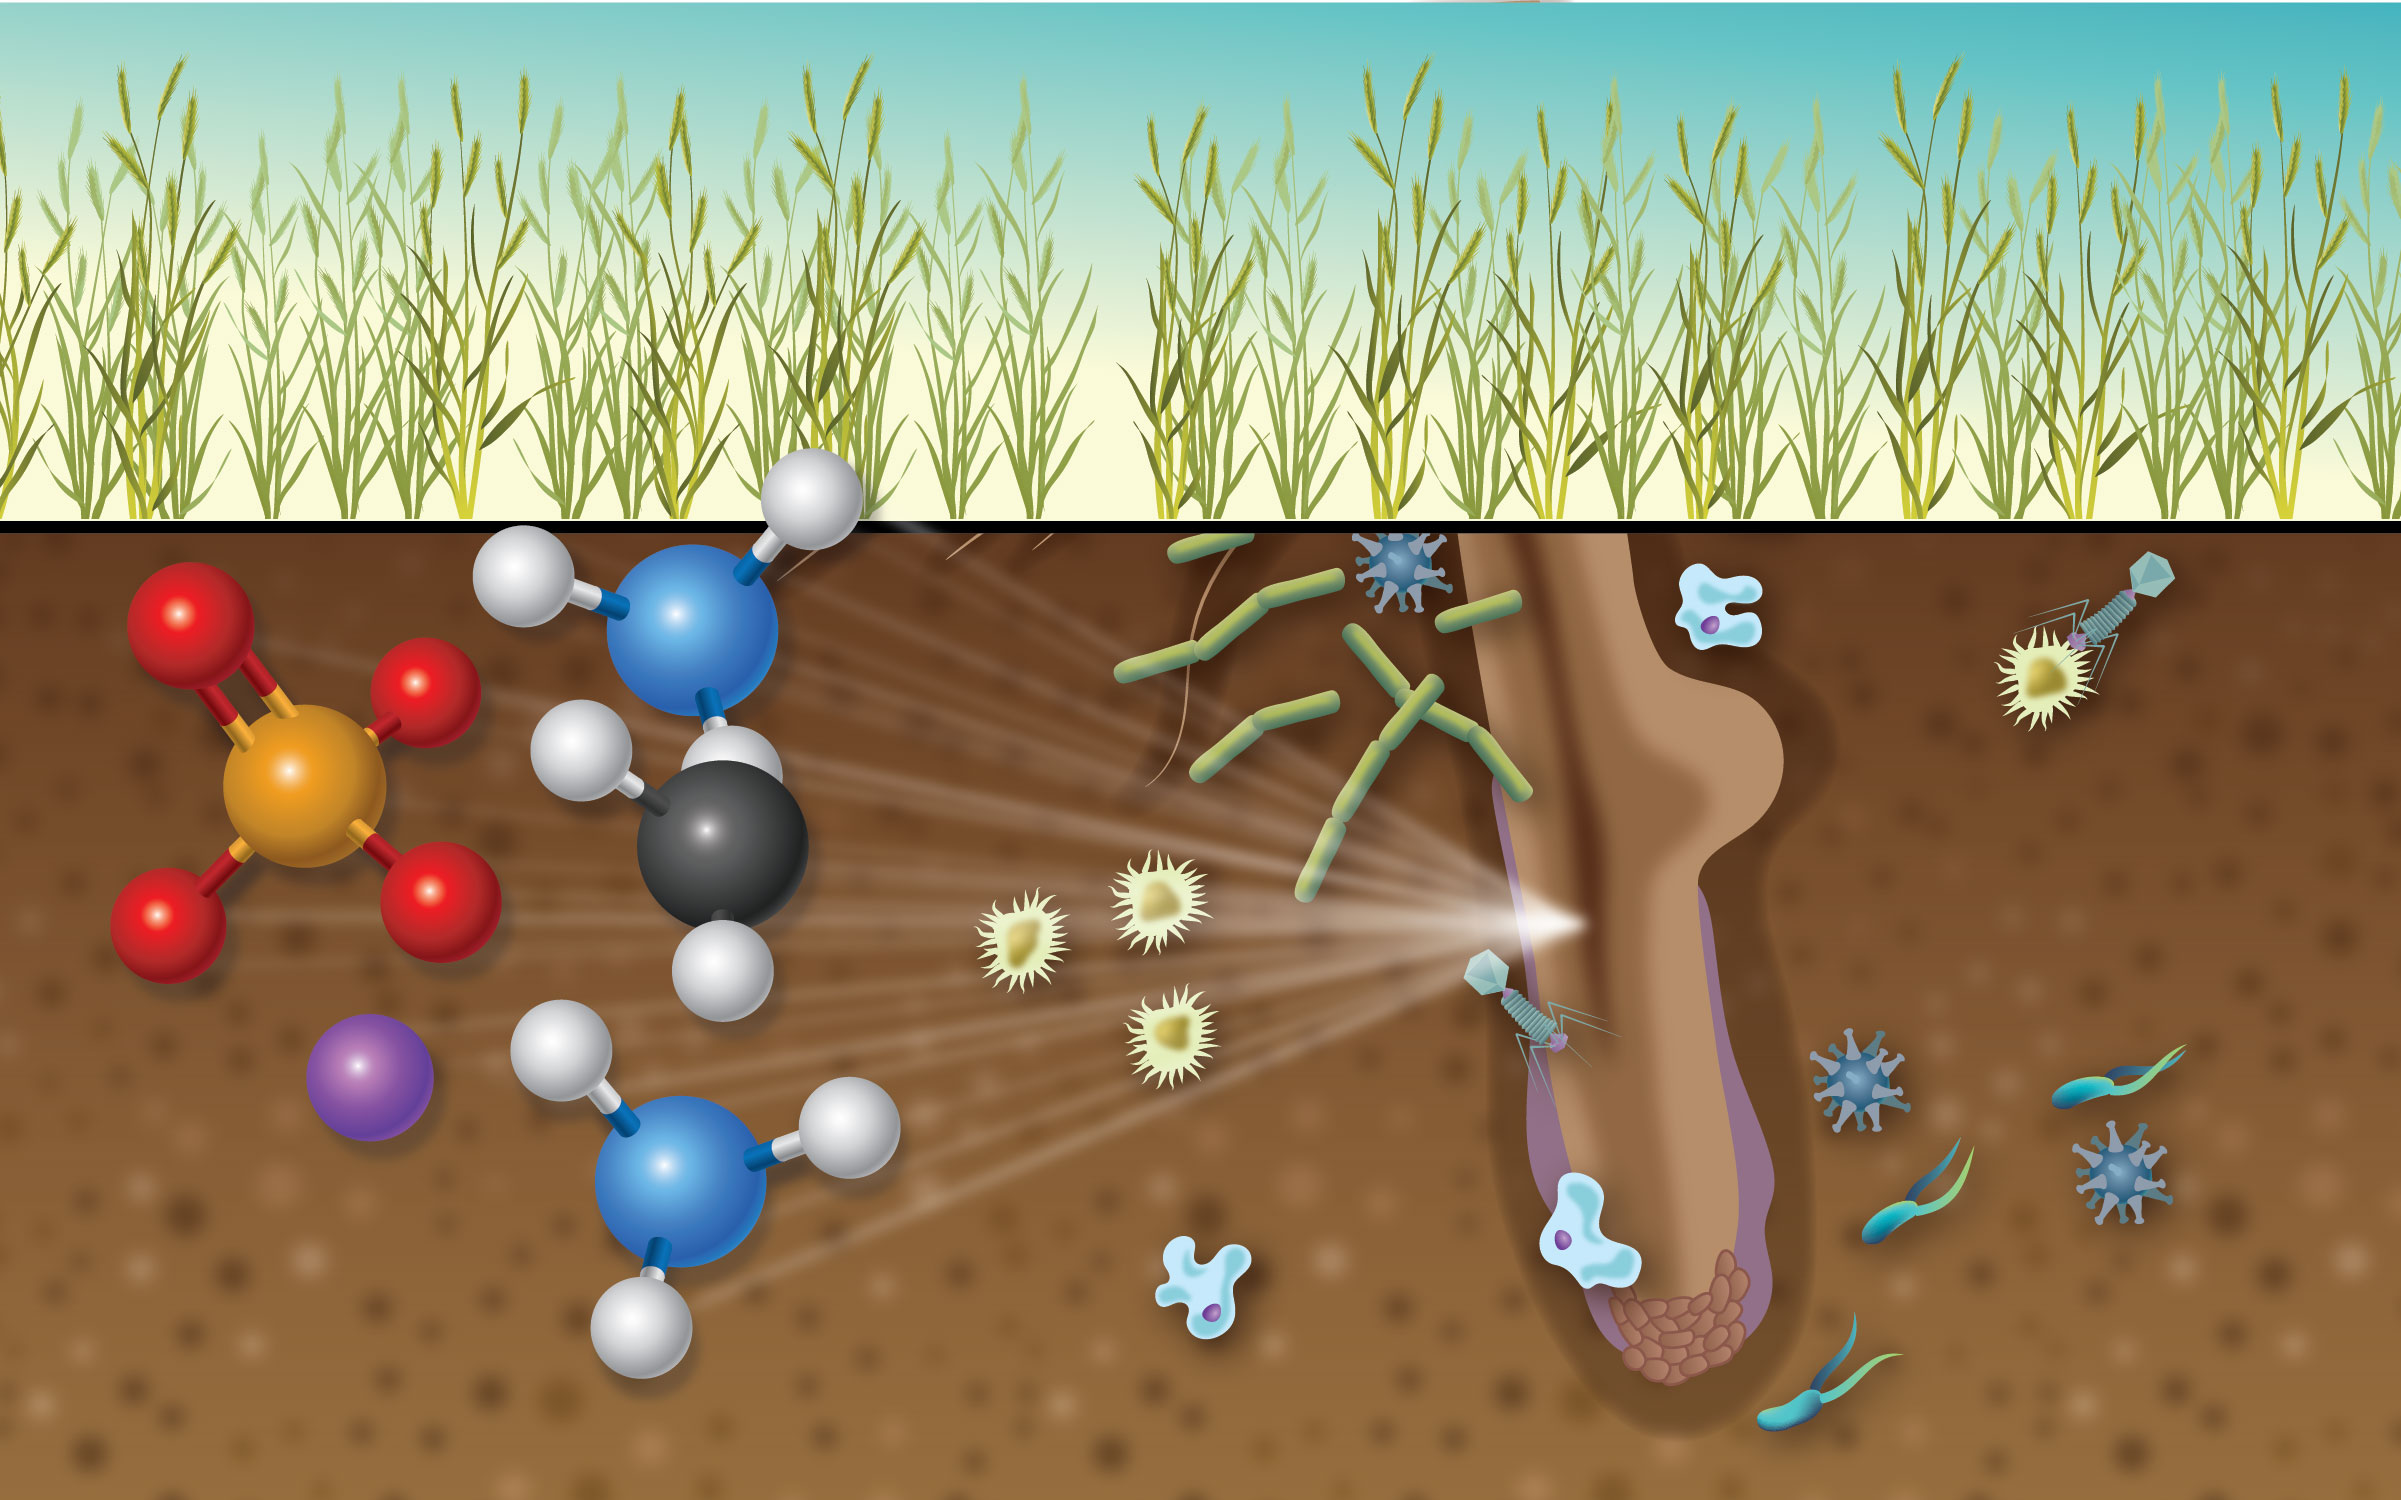 Rhizosphere Interactions on Soil Carbon Cycle under Stress Environments